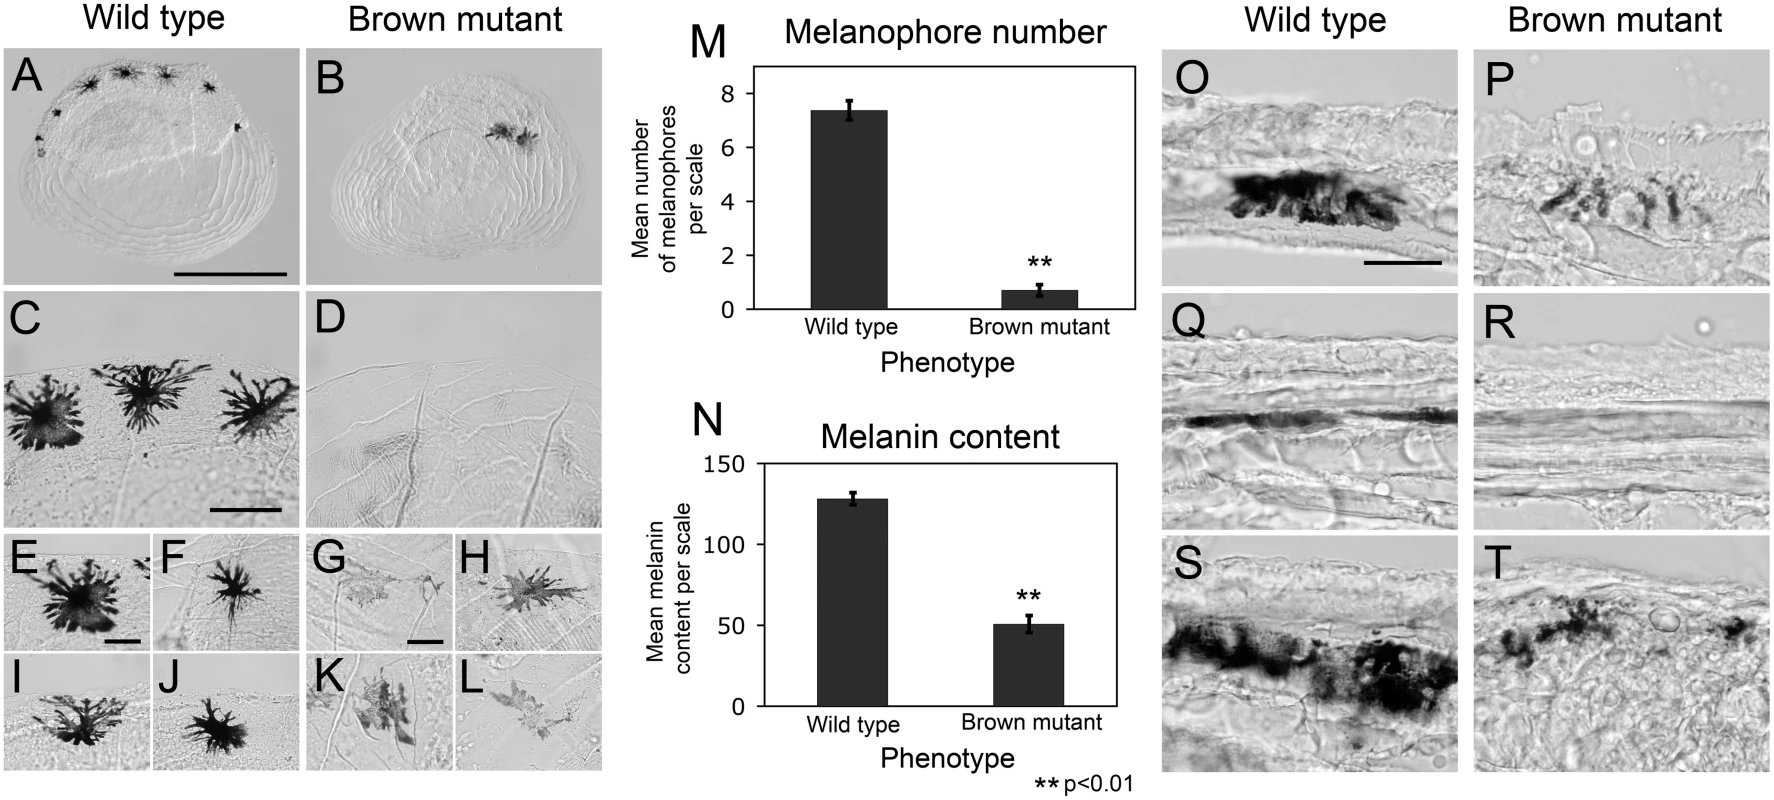 Variation in melanophore number and melanin content in scales derived from Surface (wild type) and brown mutant fish.